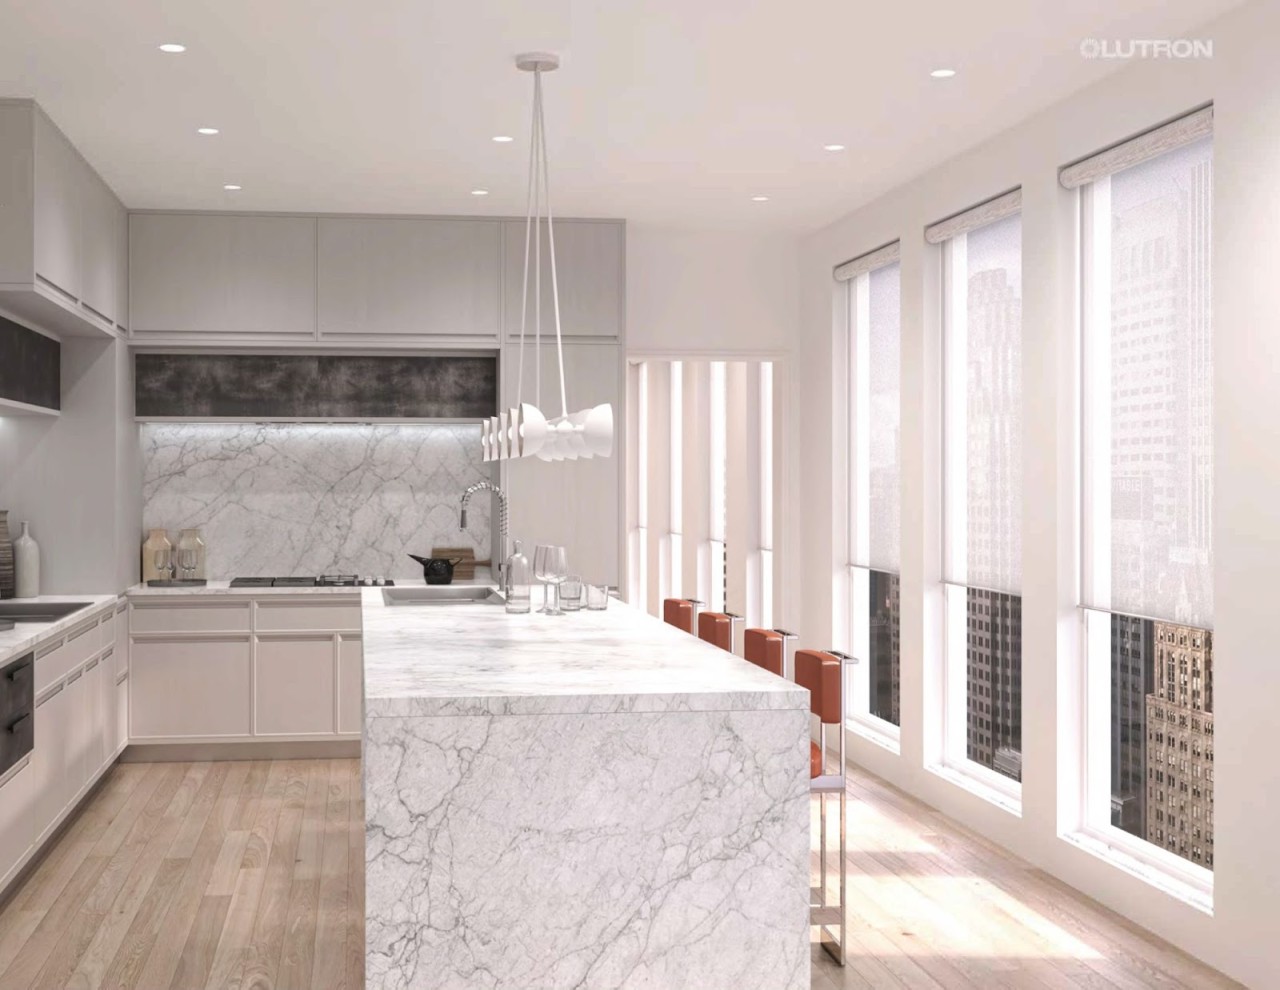 Morning sunshine streams into a kitchen in a modern high-rise with Lutron palladiom shades halfway open on the windows.